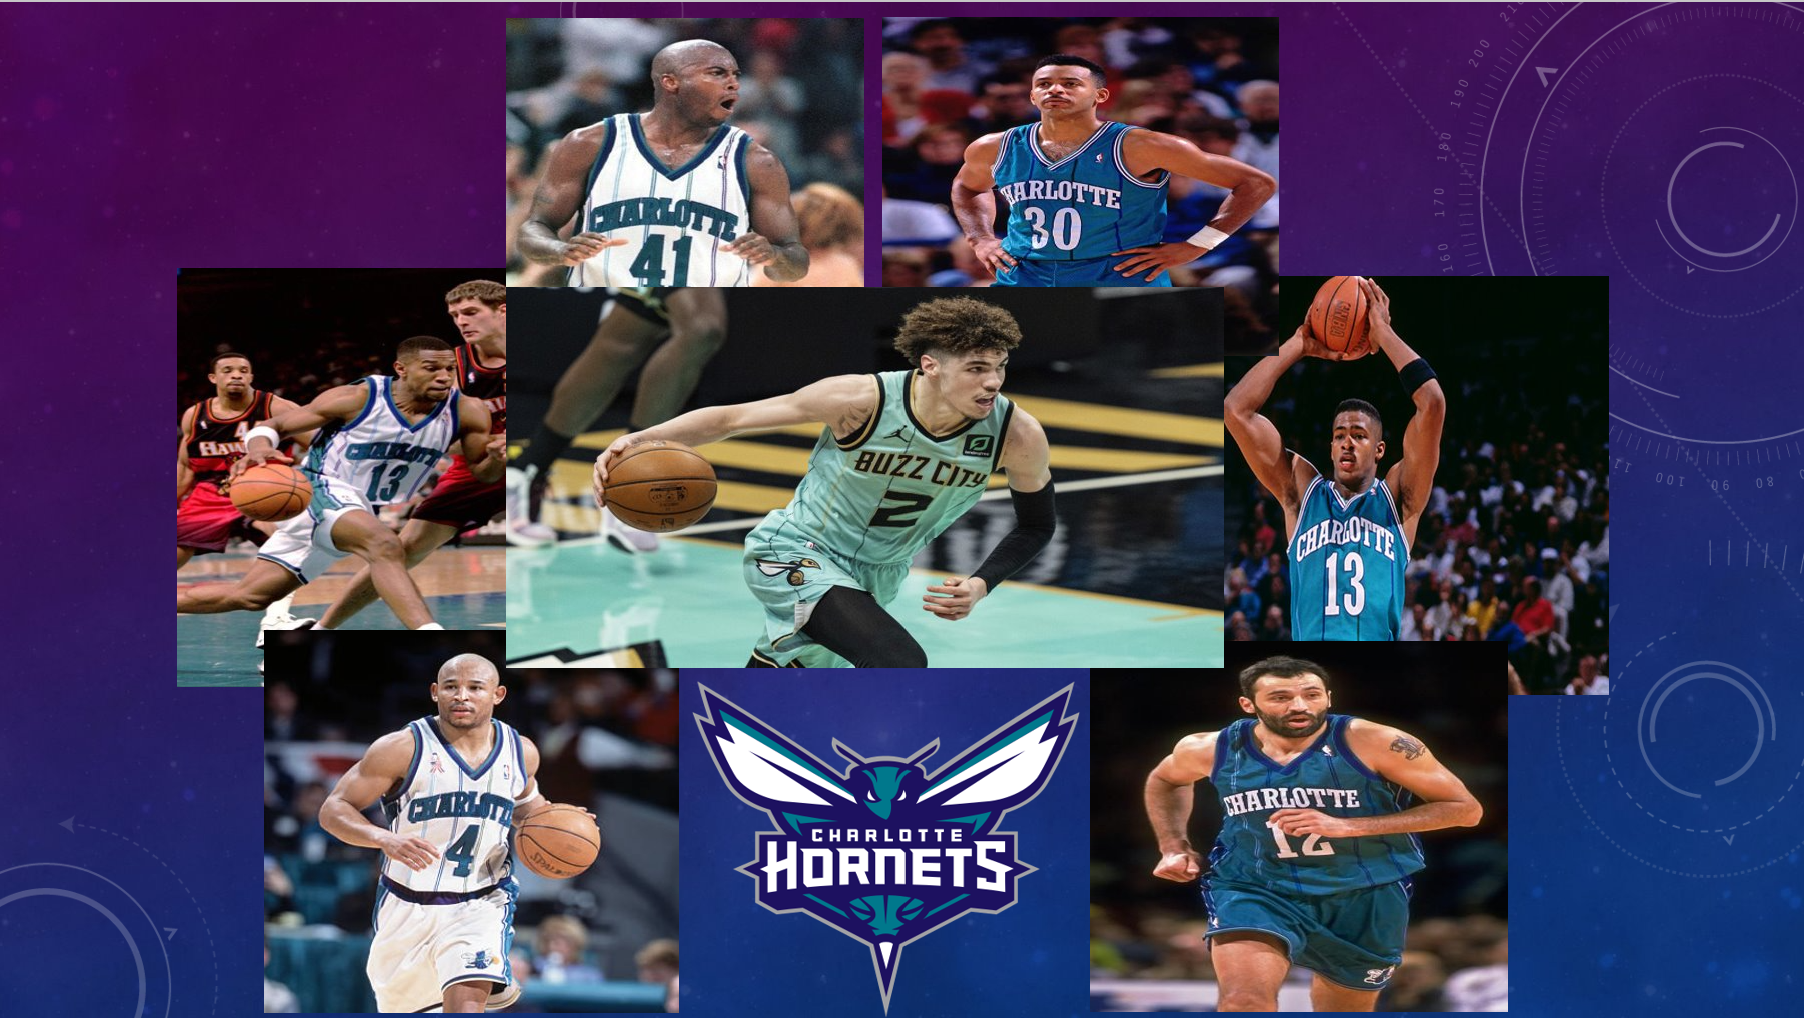 BUZZ CITY HORNETS 01 JERSEY FREE CUSTOMIZE OF NAME AND NUMBER ONLY